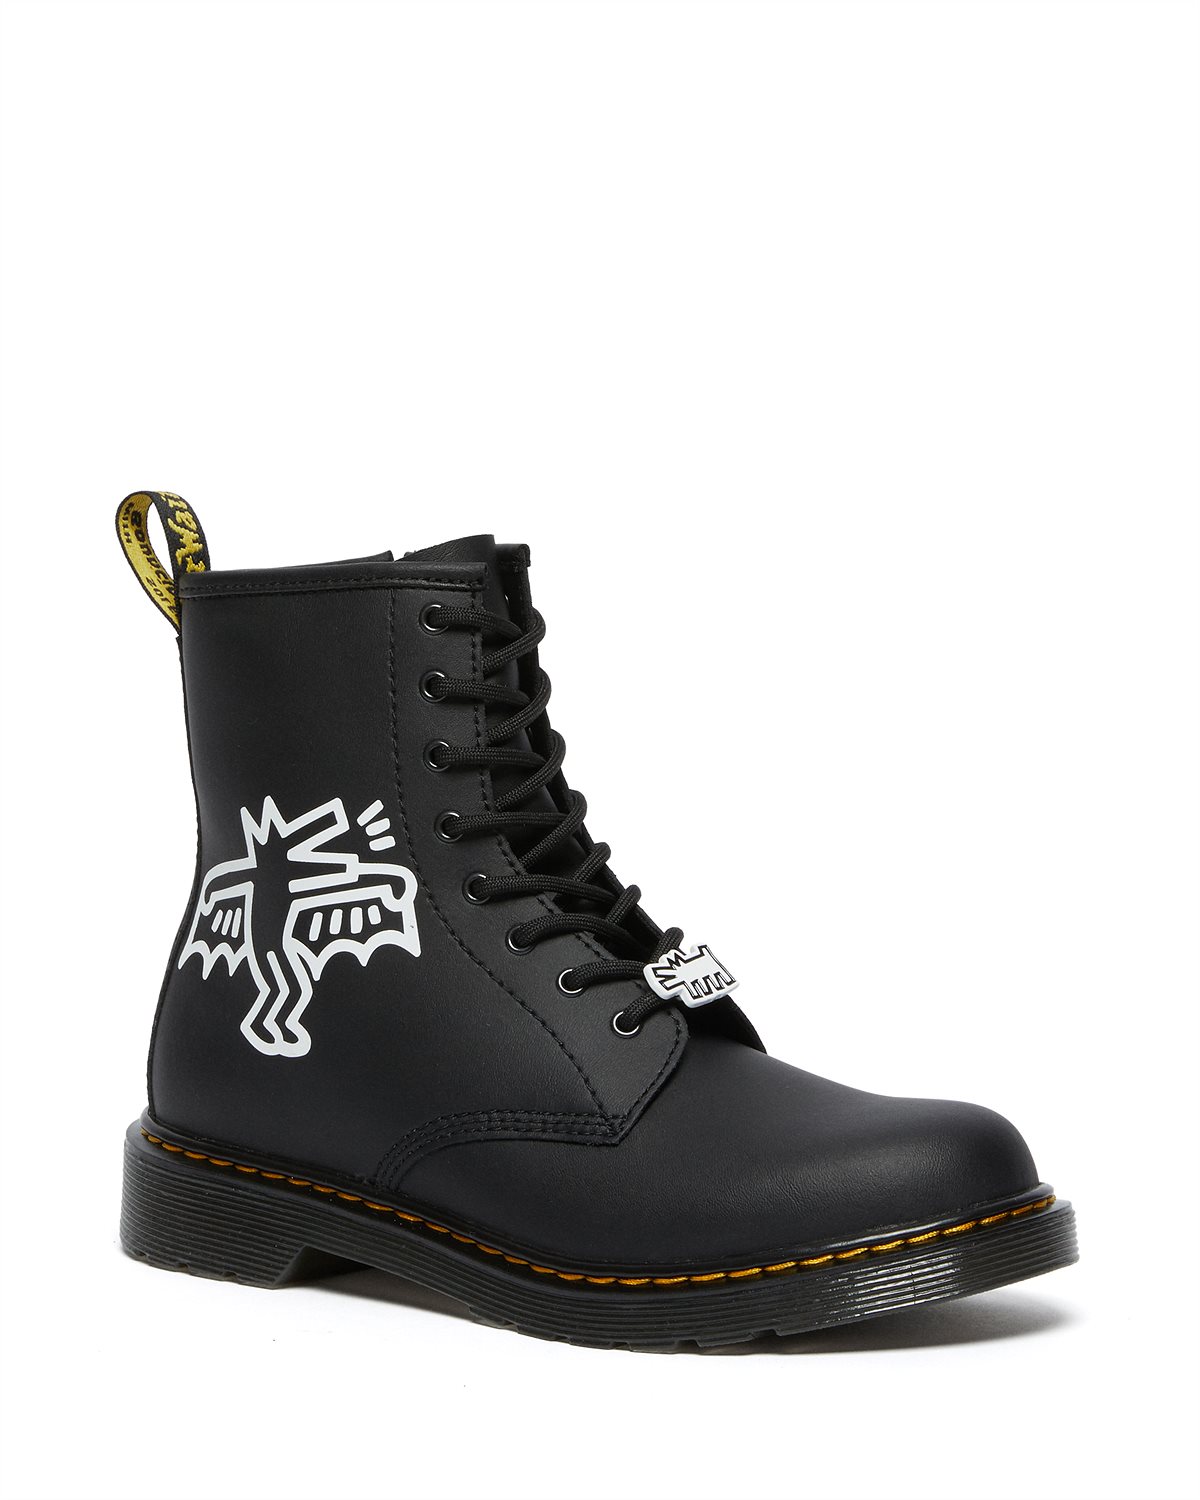 HUMANIC 12 Dr. Martens x Keith Haring Schnürboot EUR 4223507730